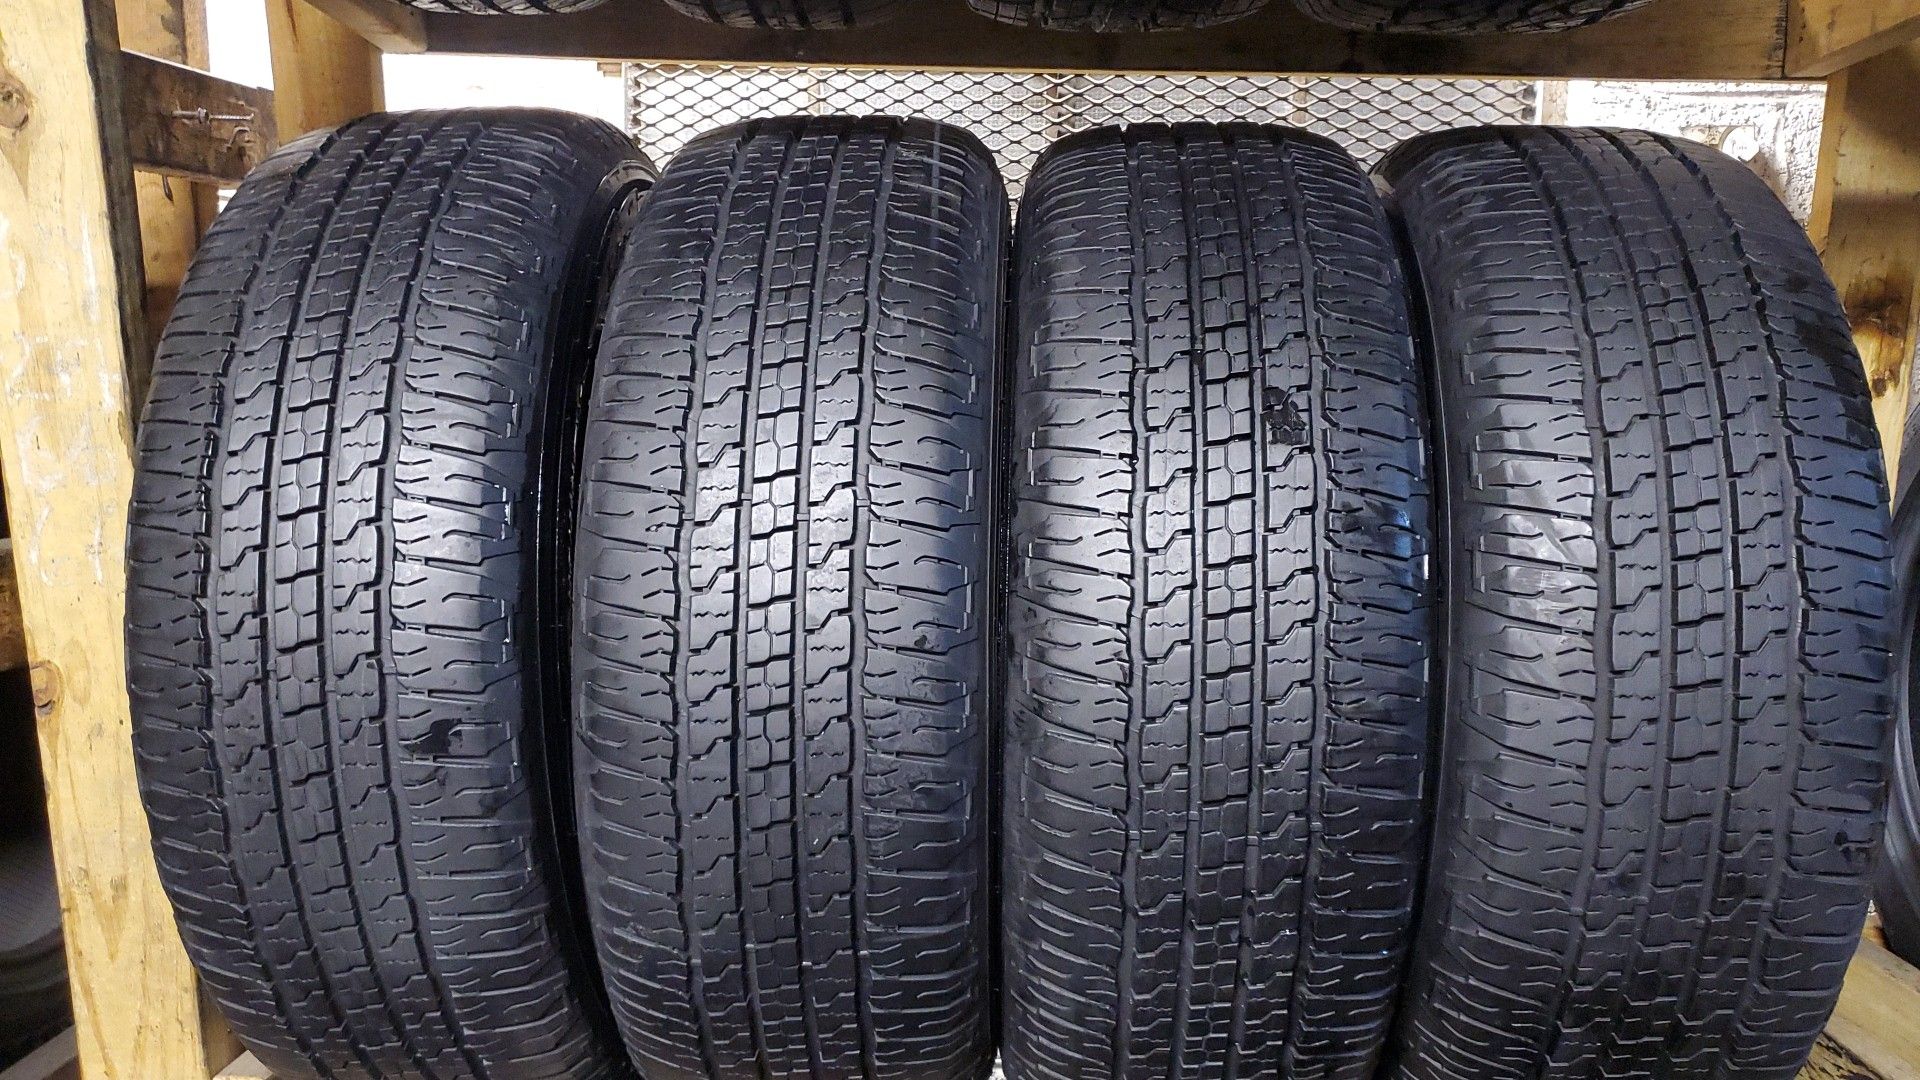 Four good set of Goodyear tires for sale 275/65/18